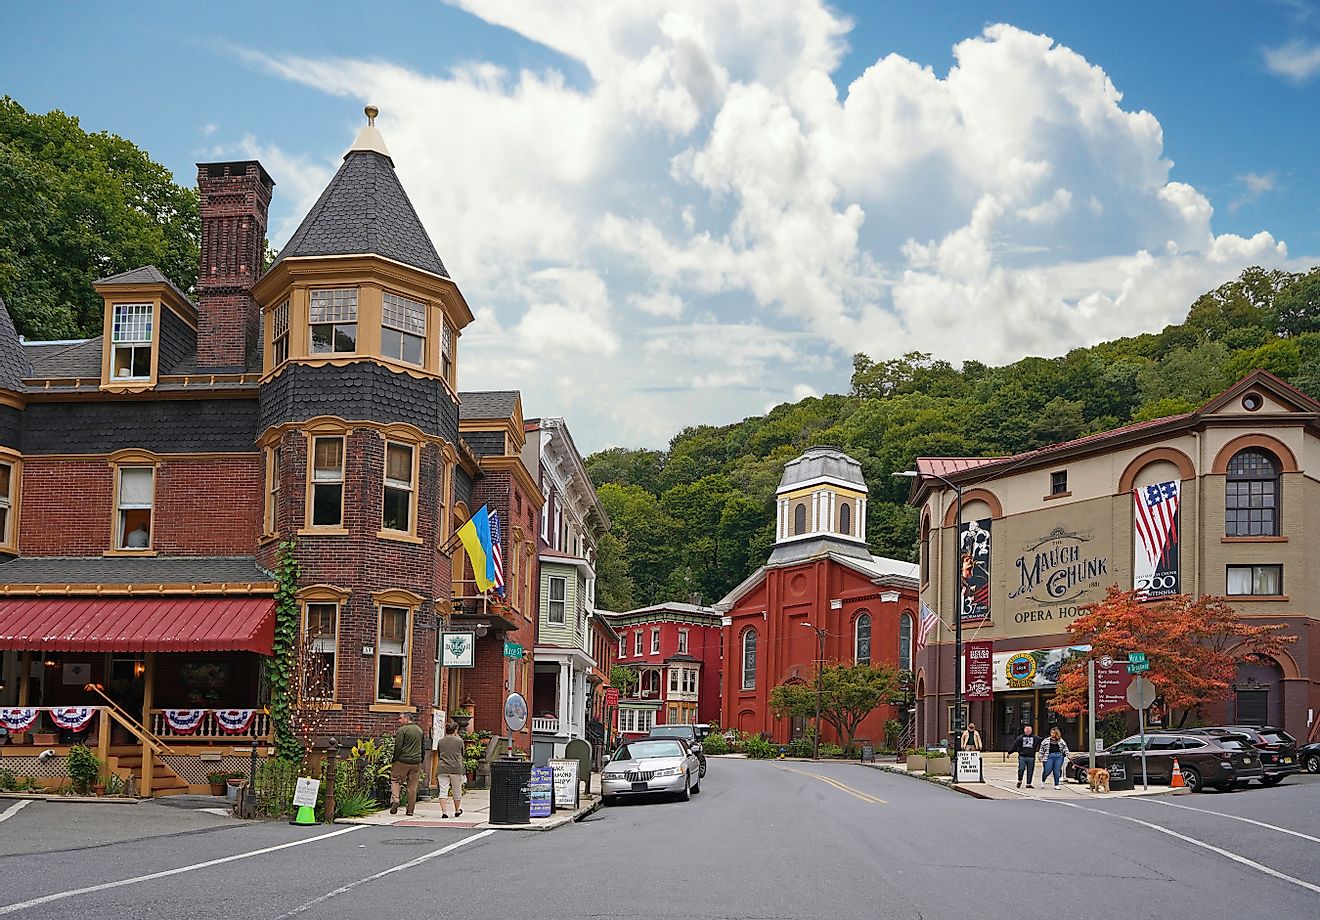 The Mauch Chunk Opera House in historic downtown Jim Thorpe , Pennsylvania. Editorial credit: zimmytws / Shutterstock.com.